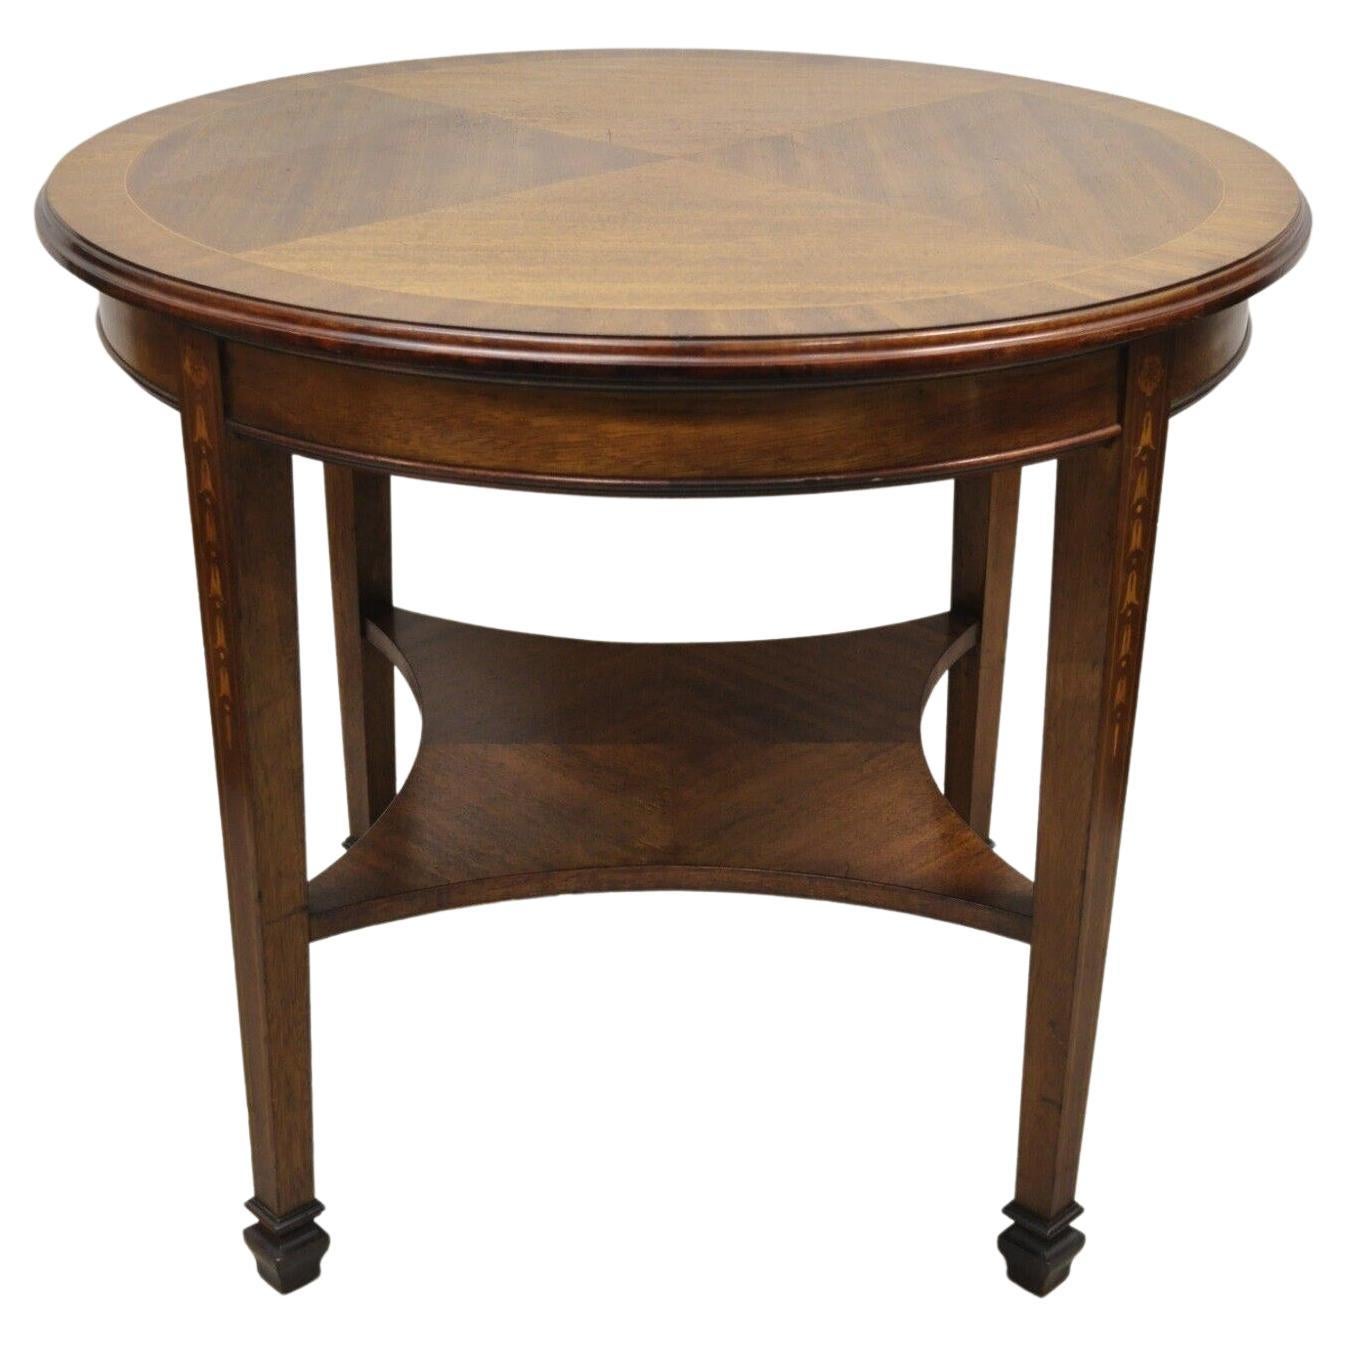 Antique Mahogany Edwardian Bellflower Inlay Round Center Table For Sale